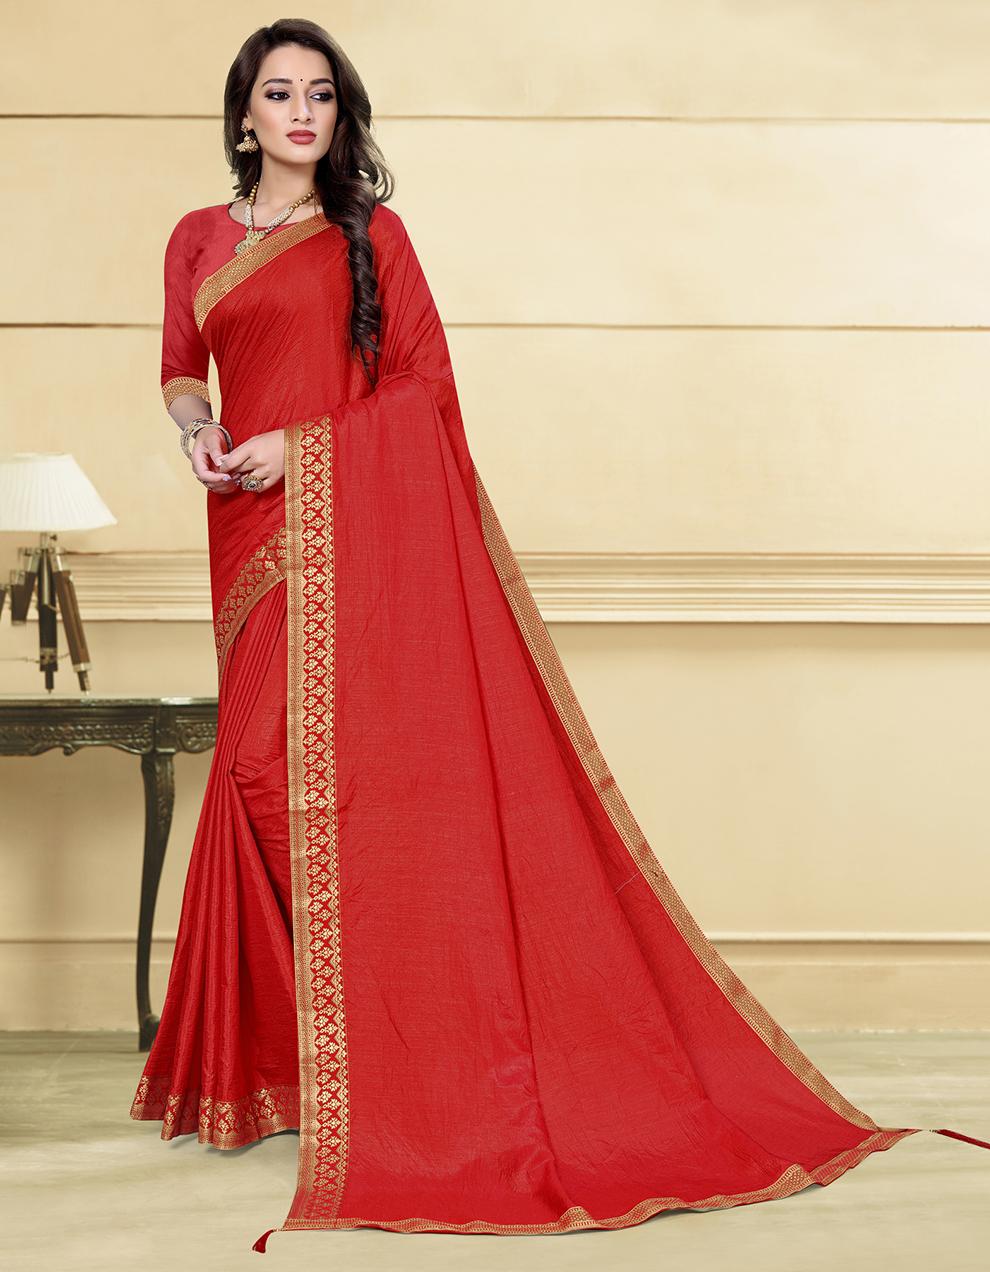 Red Vichitra Silk Saree With Blouse IW26998